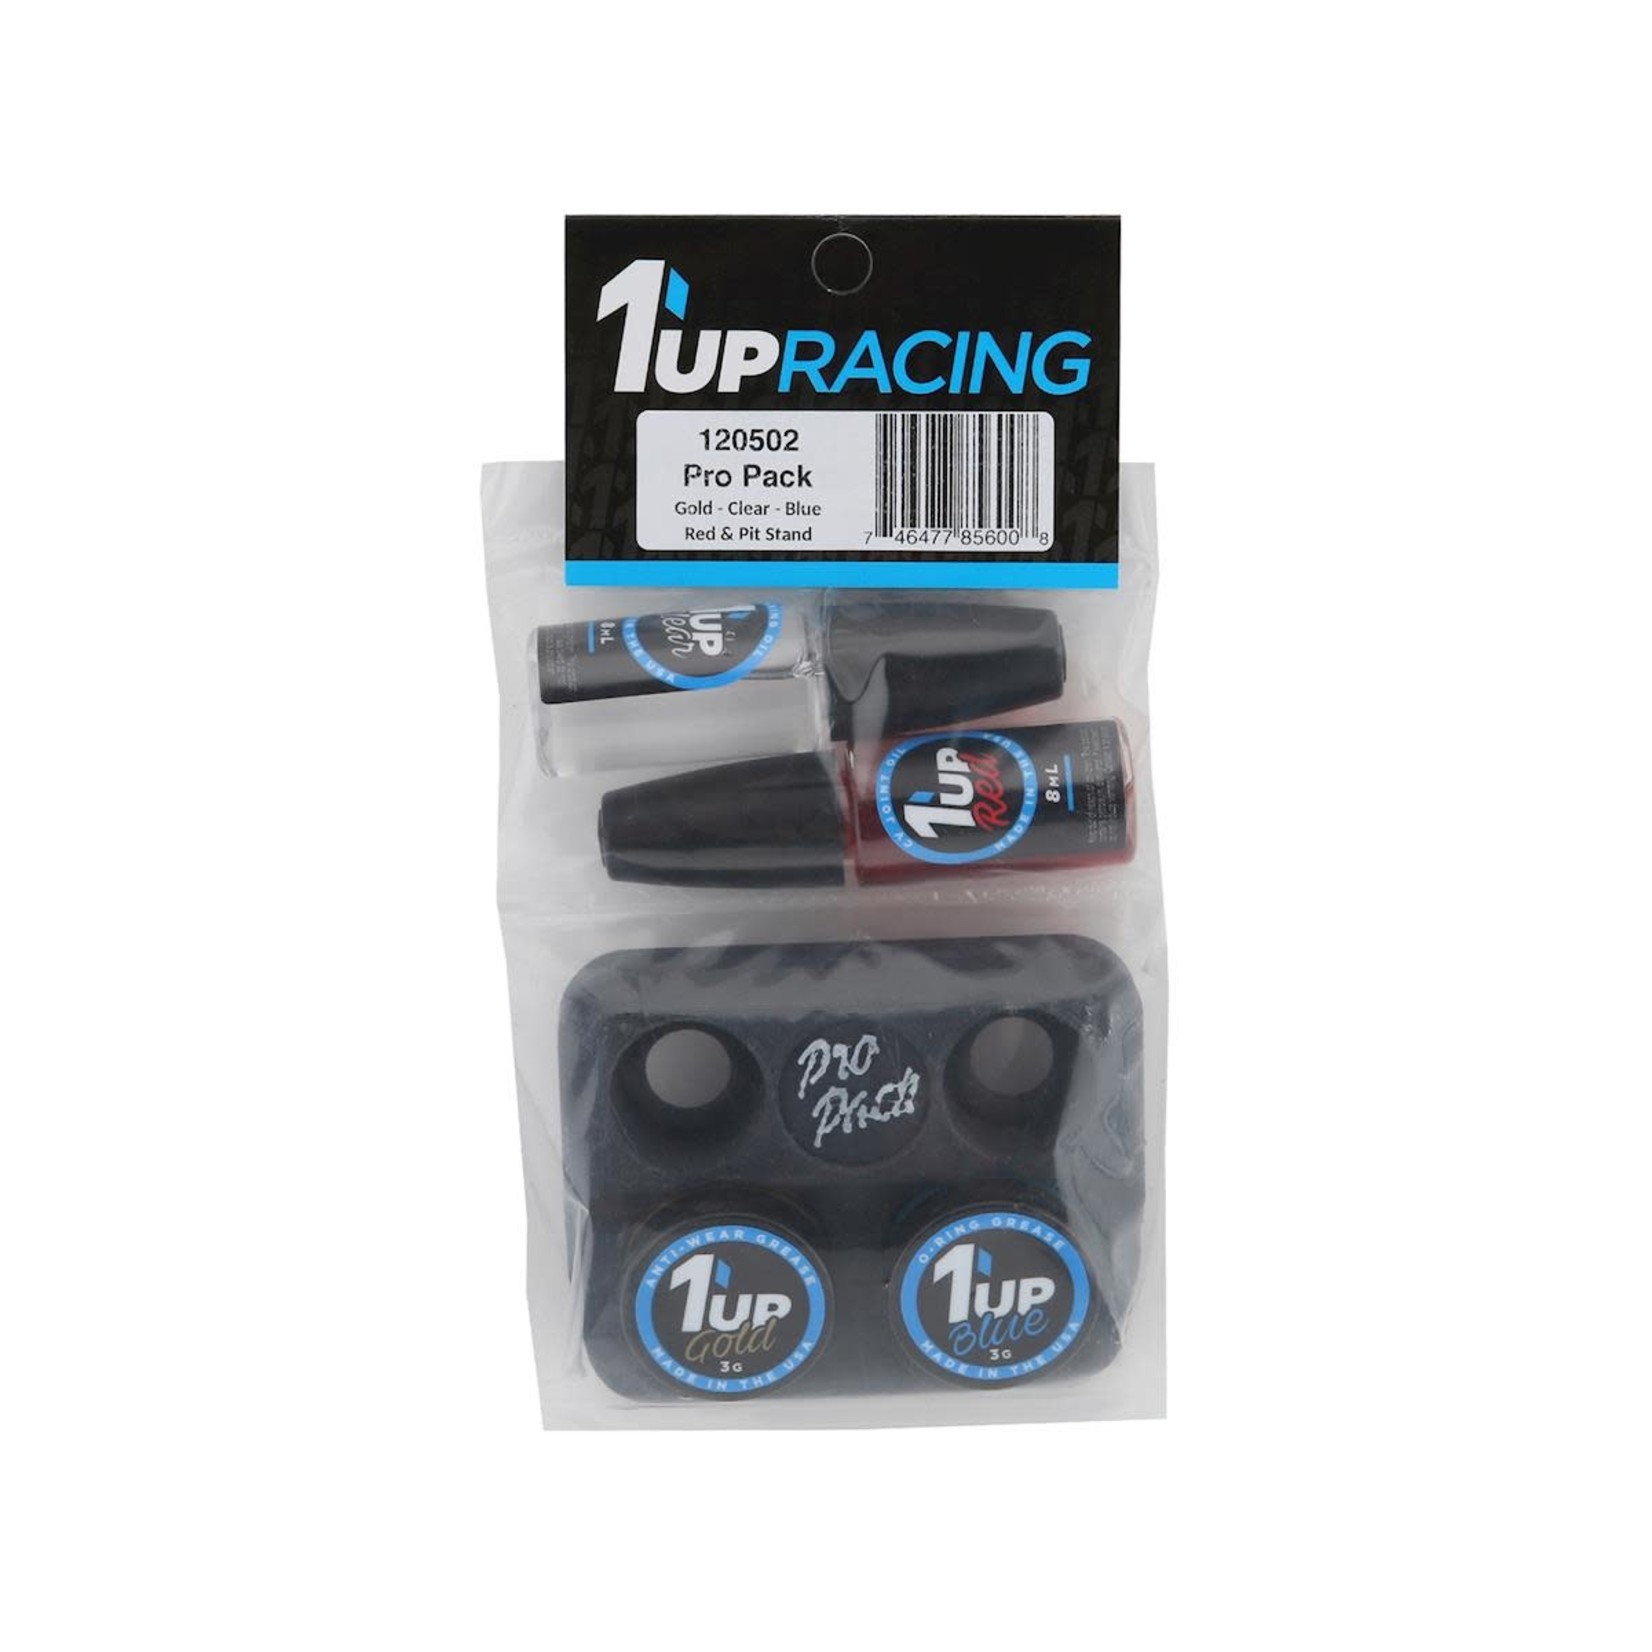 1UP Racing 1UP Racing Grease & Oil Lubricant Pro Pack w/Pit Stand #120502